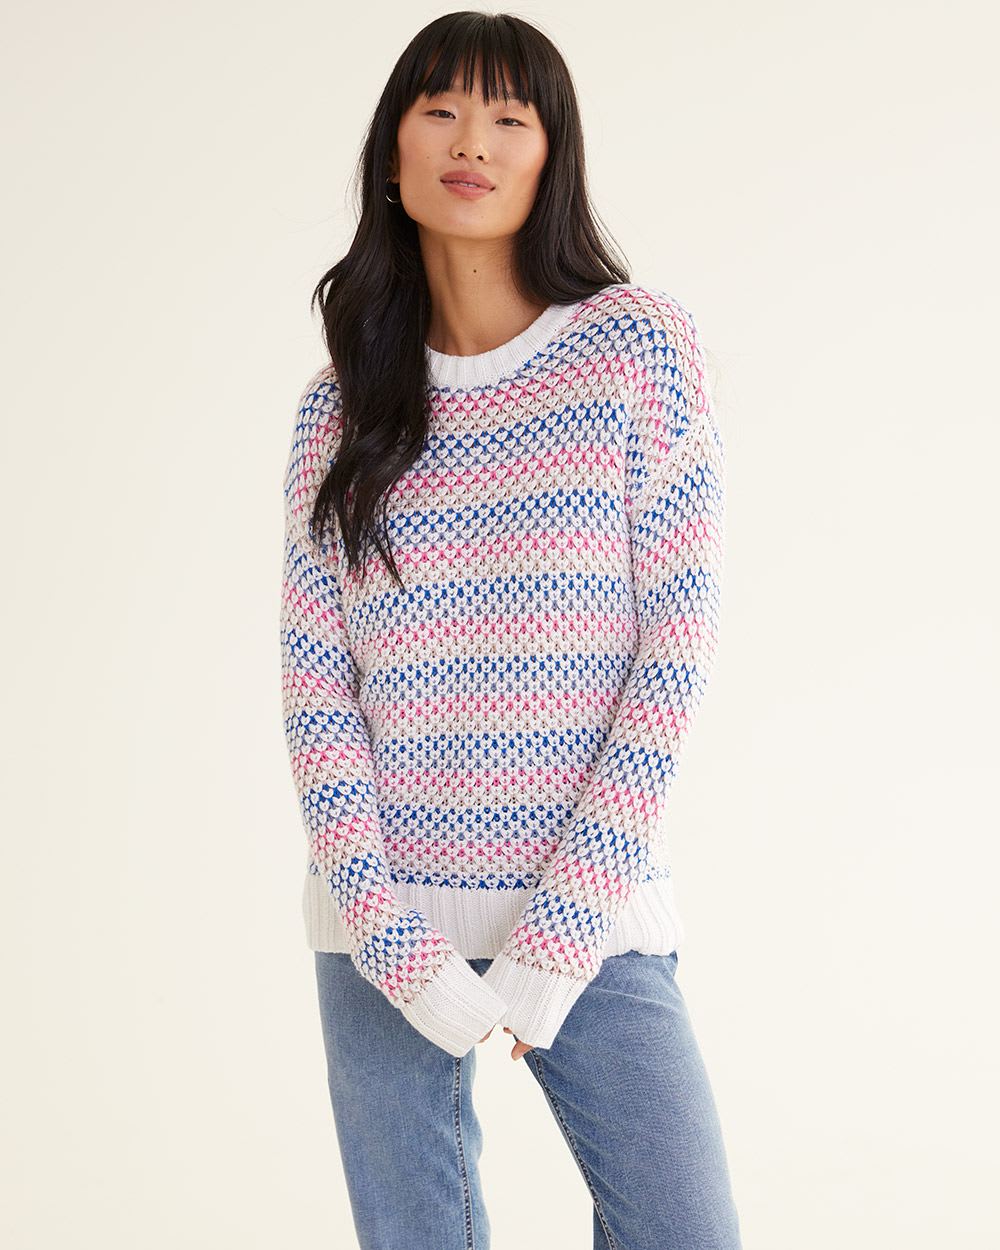 Long-Sleeve Crew-Neck Pullover with Honeycomb Stitches